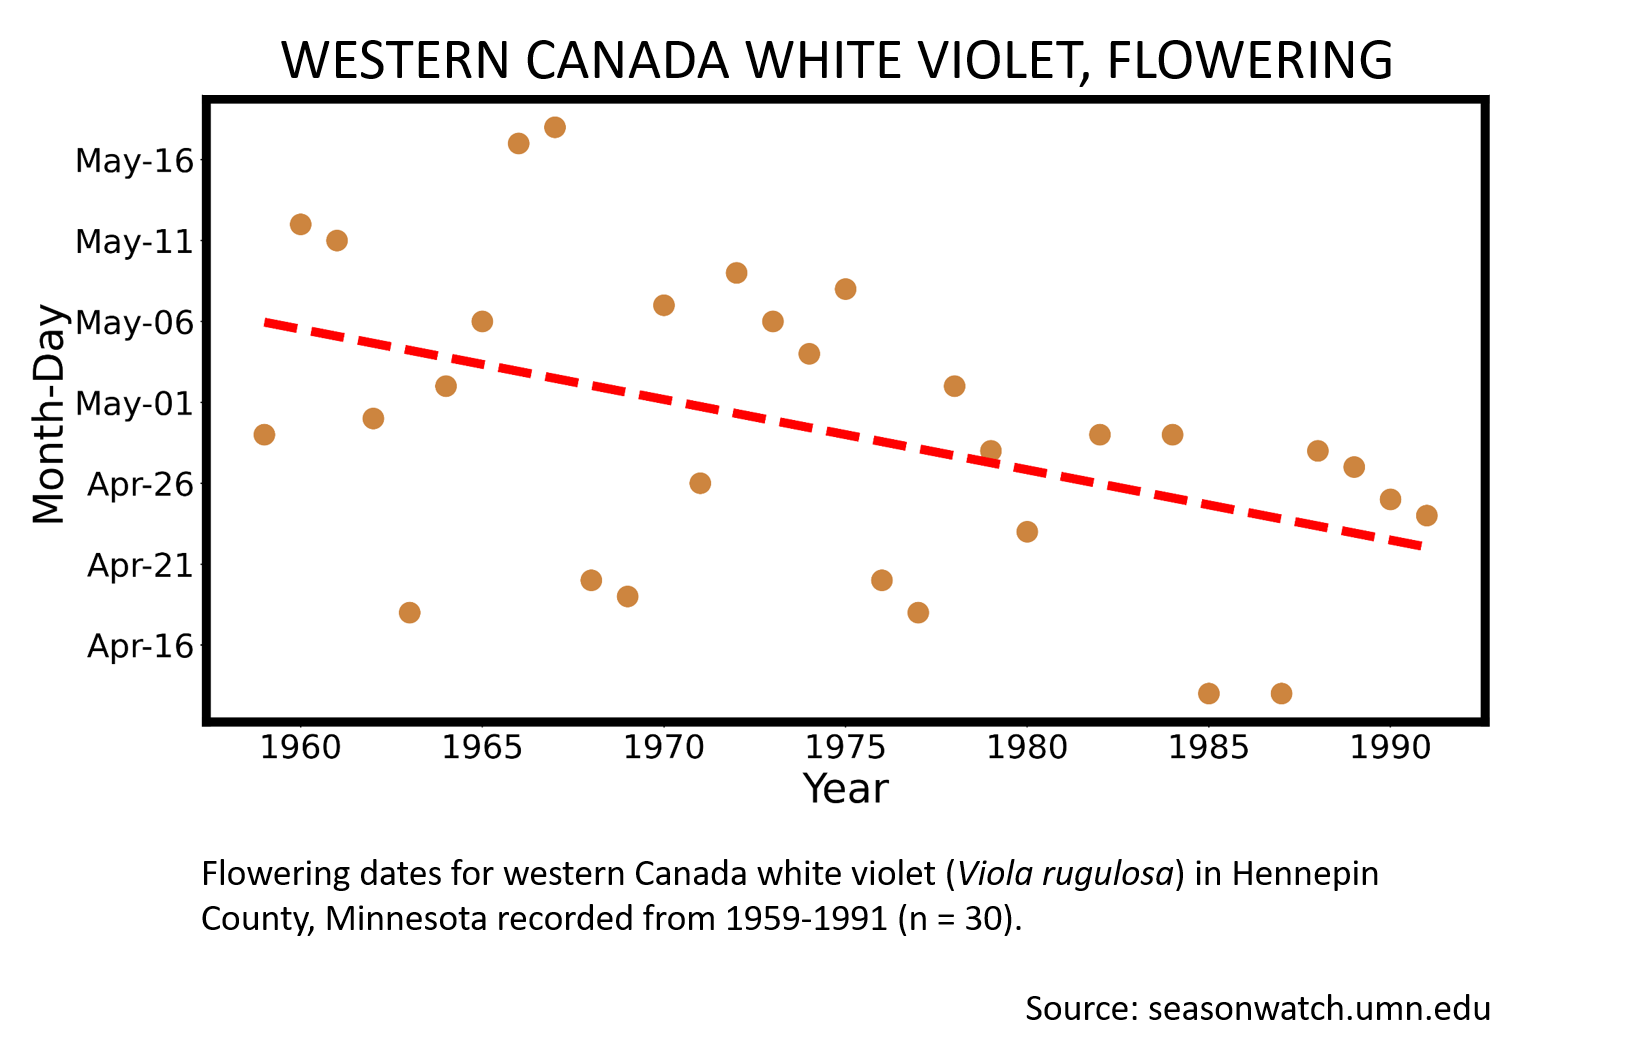 Scatterplot showing western Canada white violet phenology in Hennepin County, Minnesota